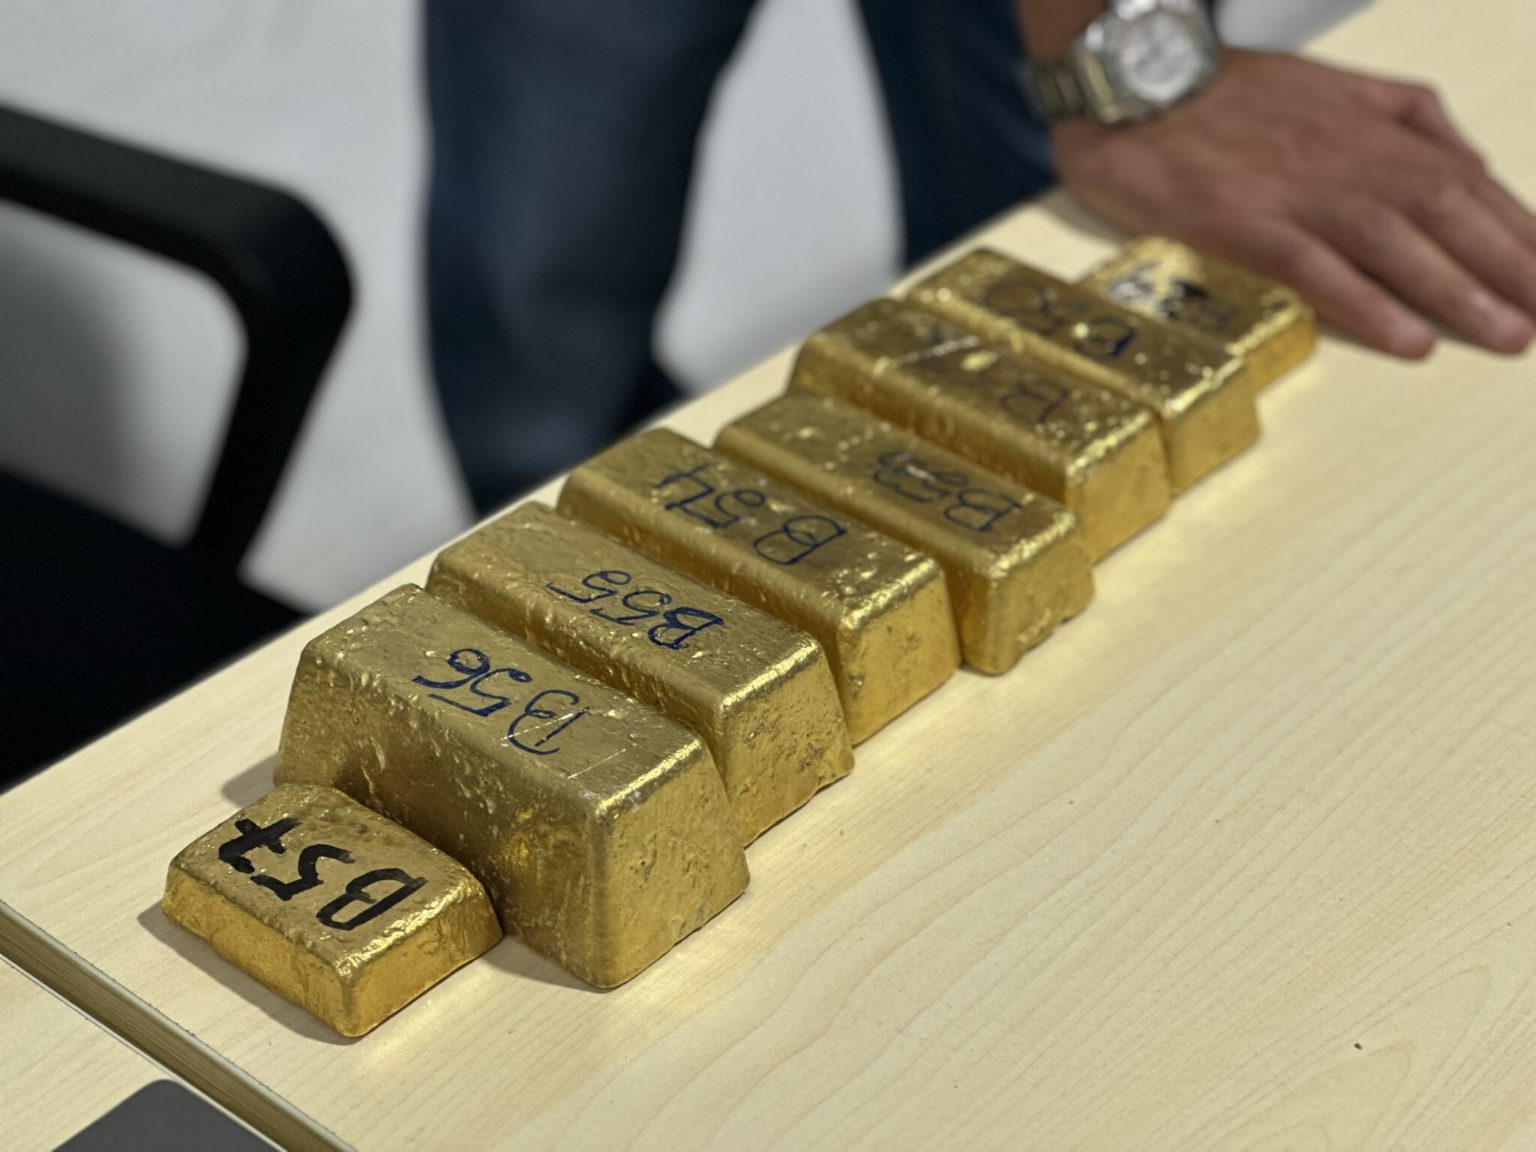 Congo to buy out UAE partner in gold venture as shipments slump